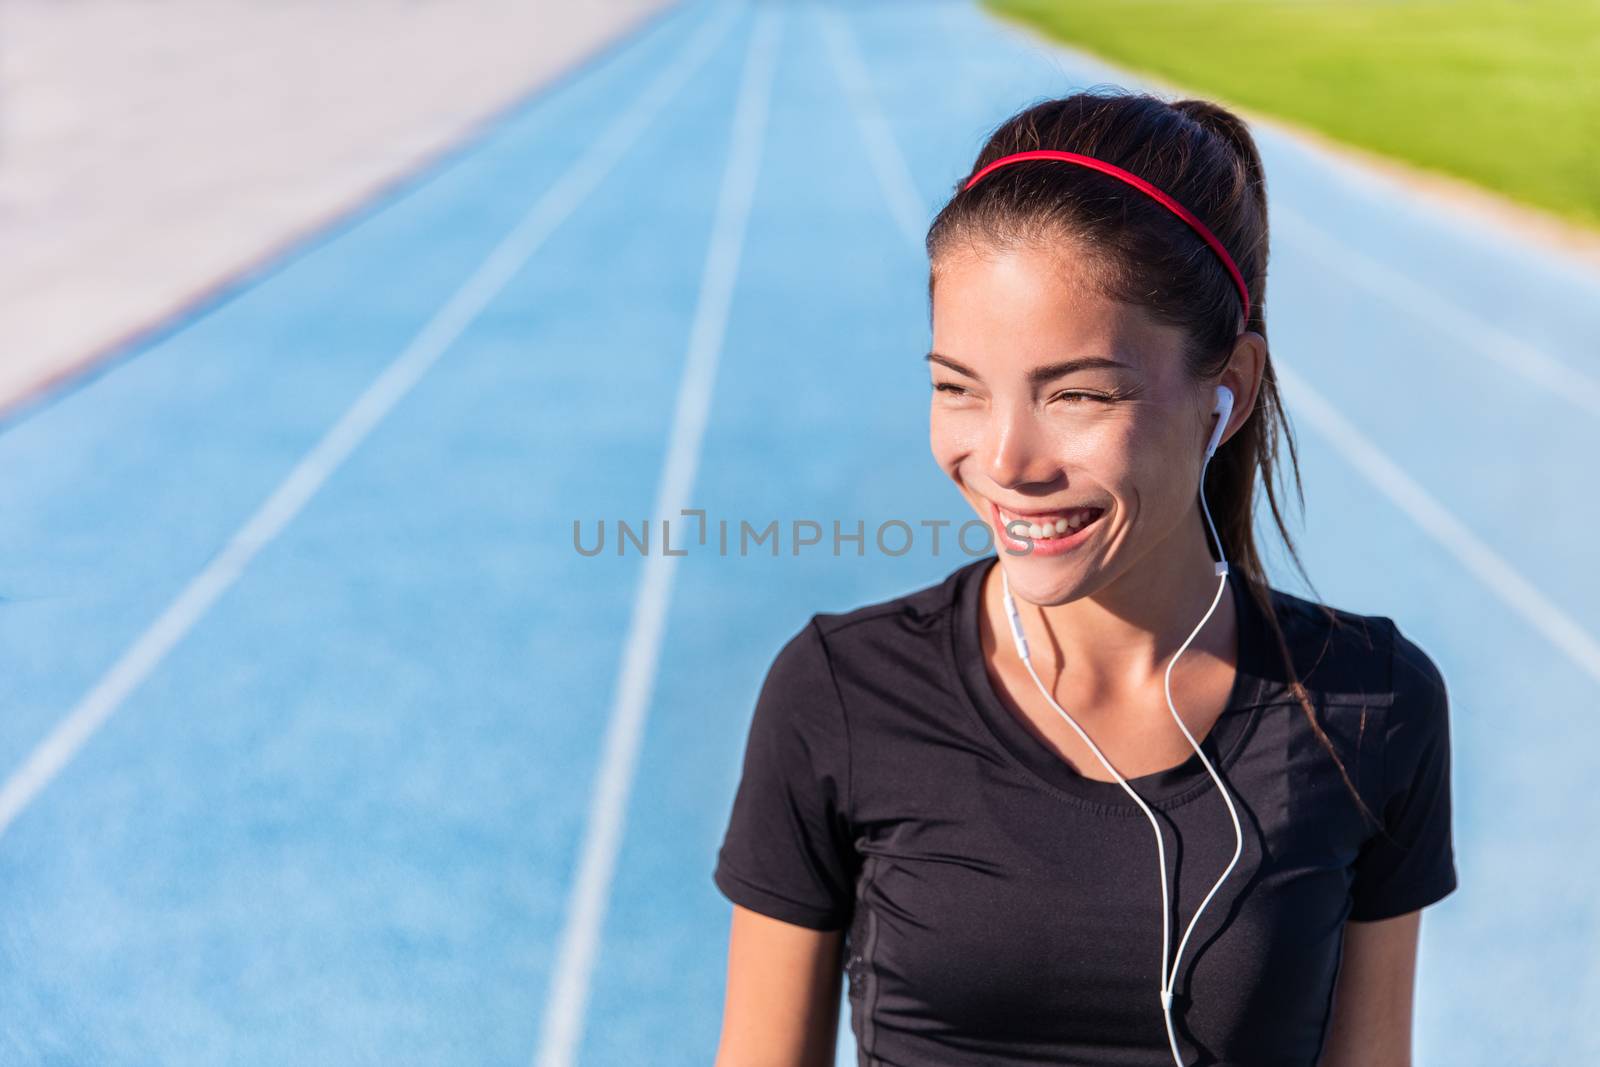 Happy track running girl runner listening to music motivation with earphones getting ready for cardio training run on blue lane athletic tracks in stadium campus. Healthy Asian athlete.